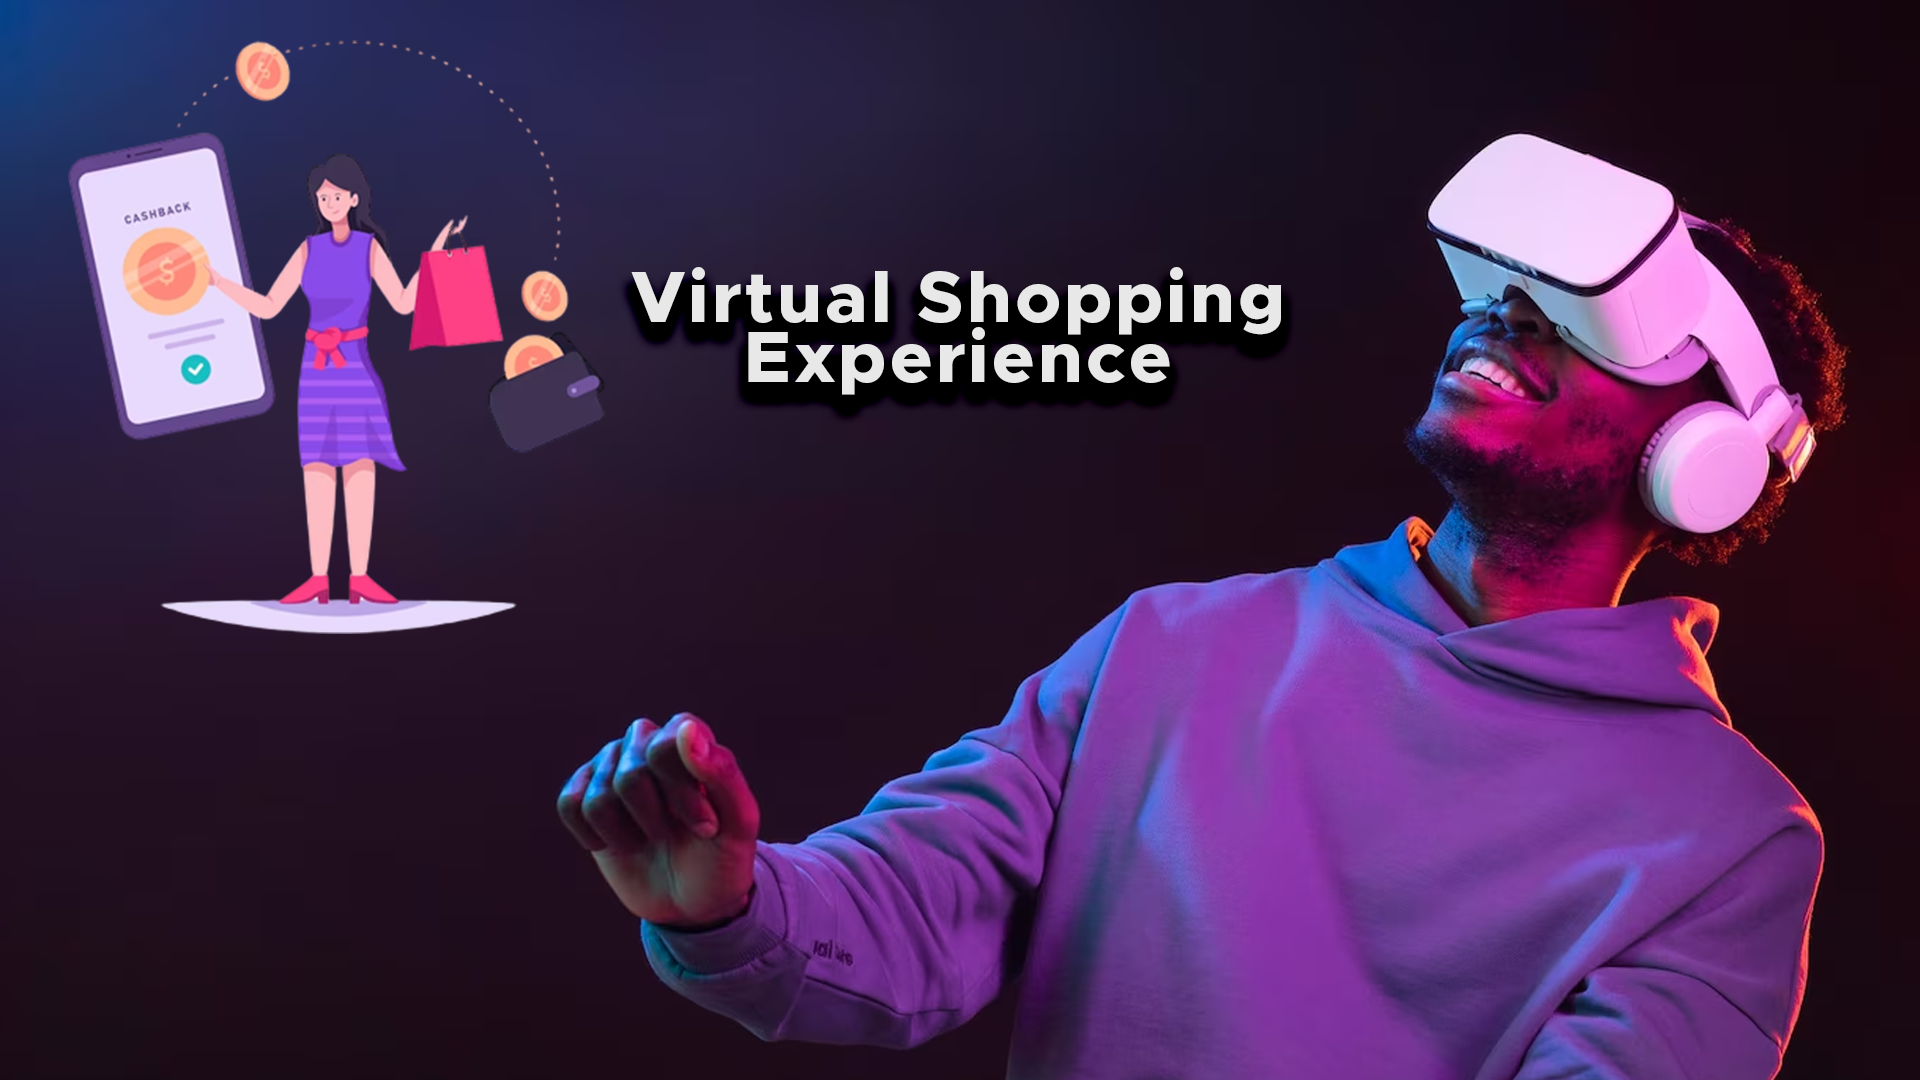 Metaverse Is Creating a New Virtual Shopping Experience